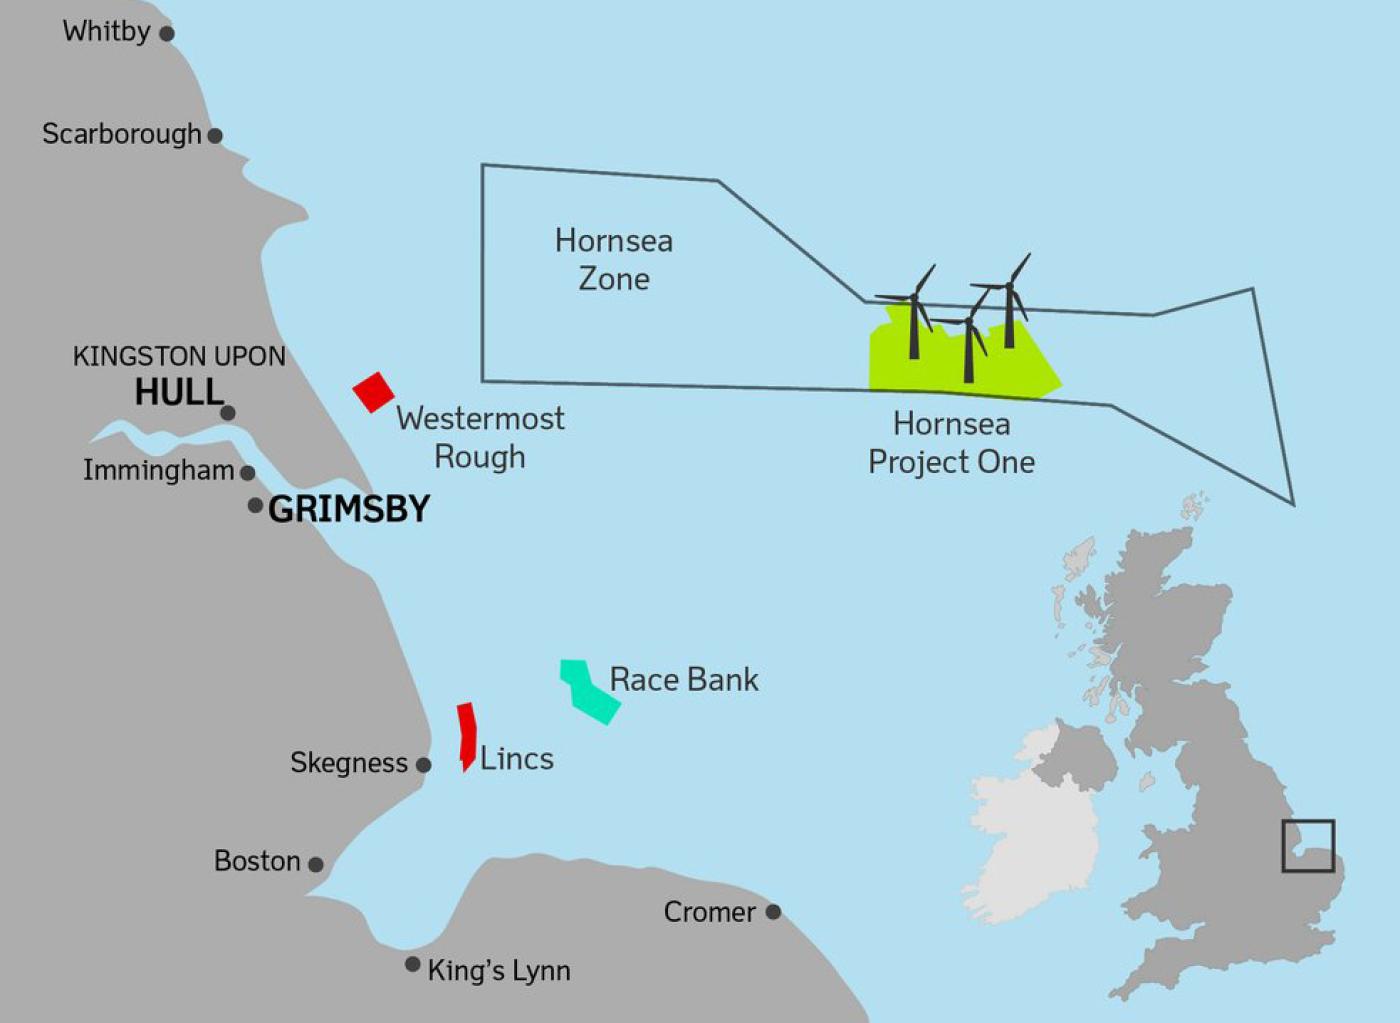 Figure 2. Hornsea Project One, North Sea Location Map. Reprinted from offshoreWIND.biz. https://www.offshorewind. biz/2016/02/03/video-how-big-is-hornsea-project-one/